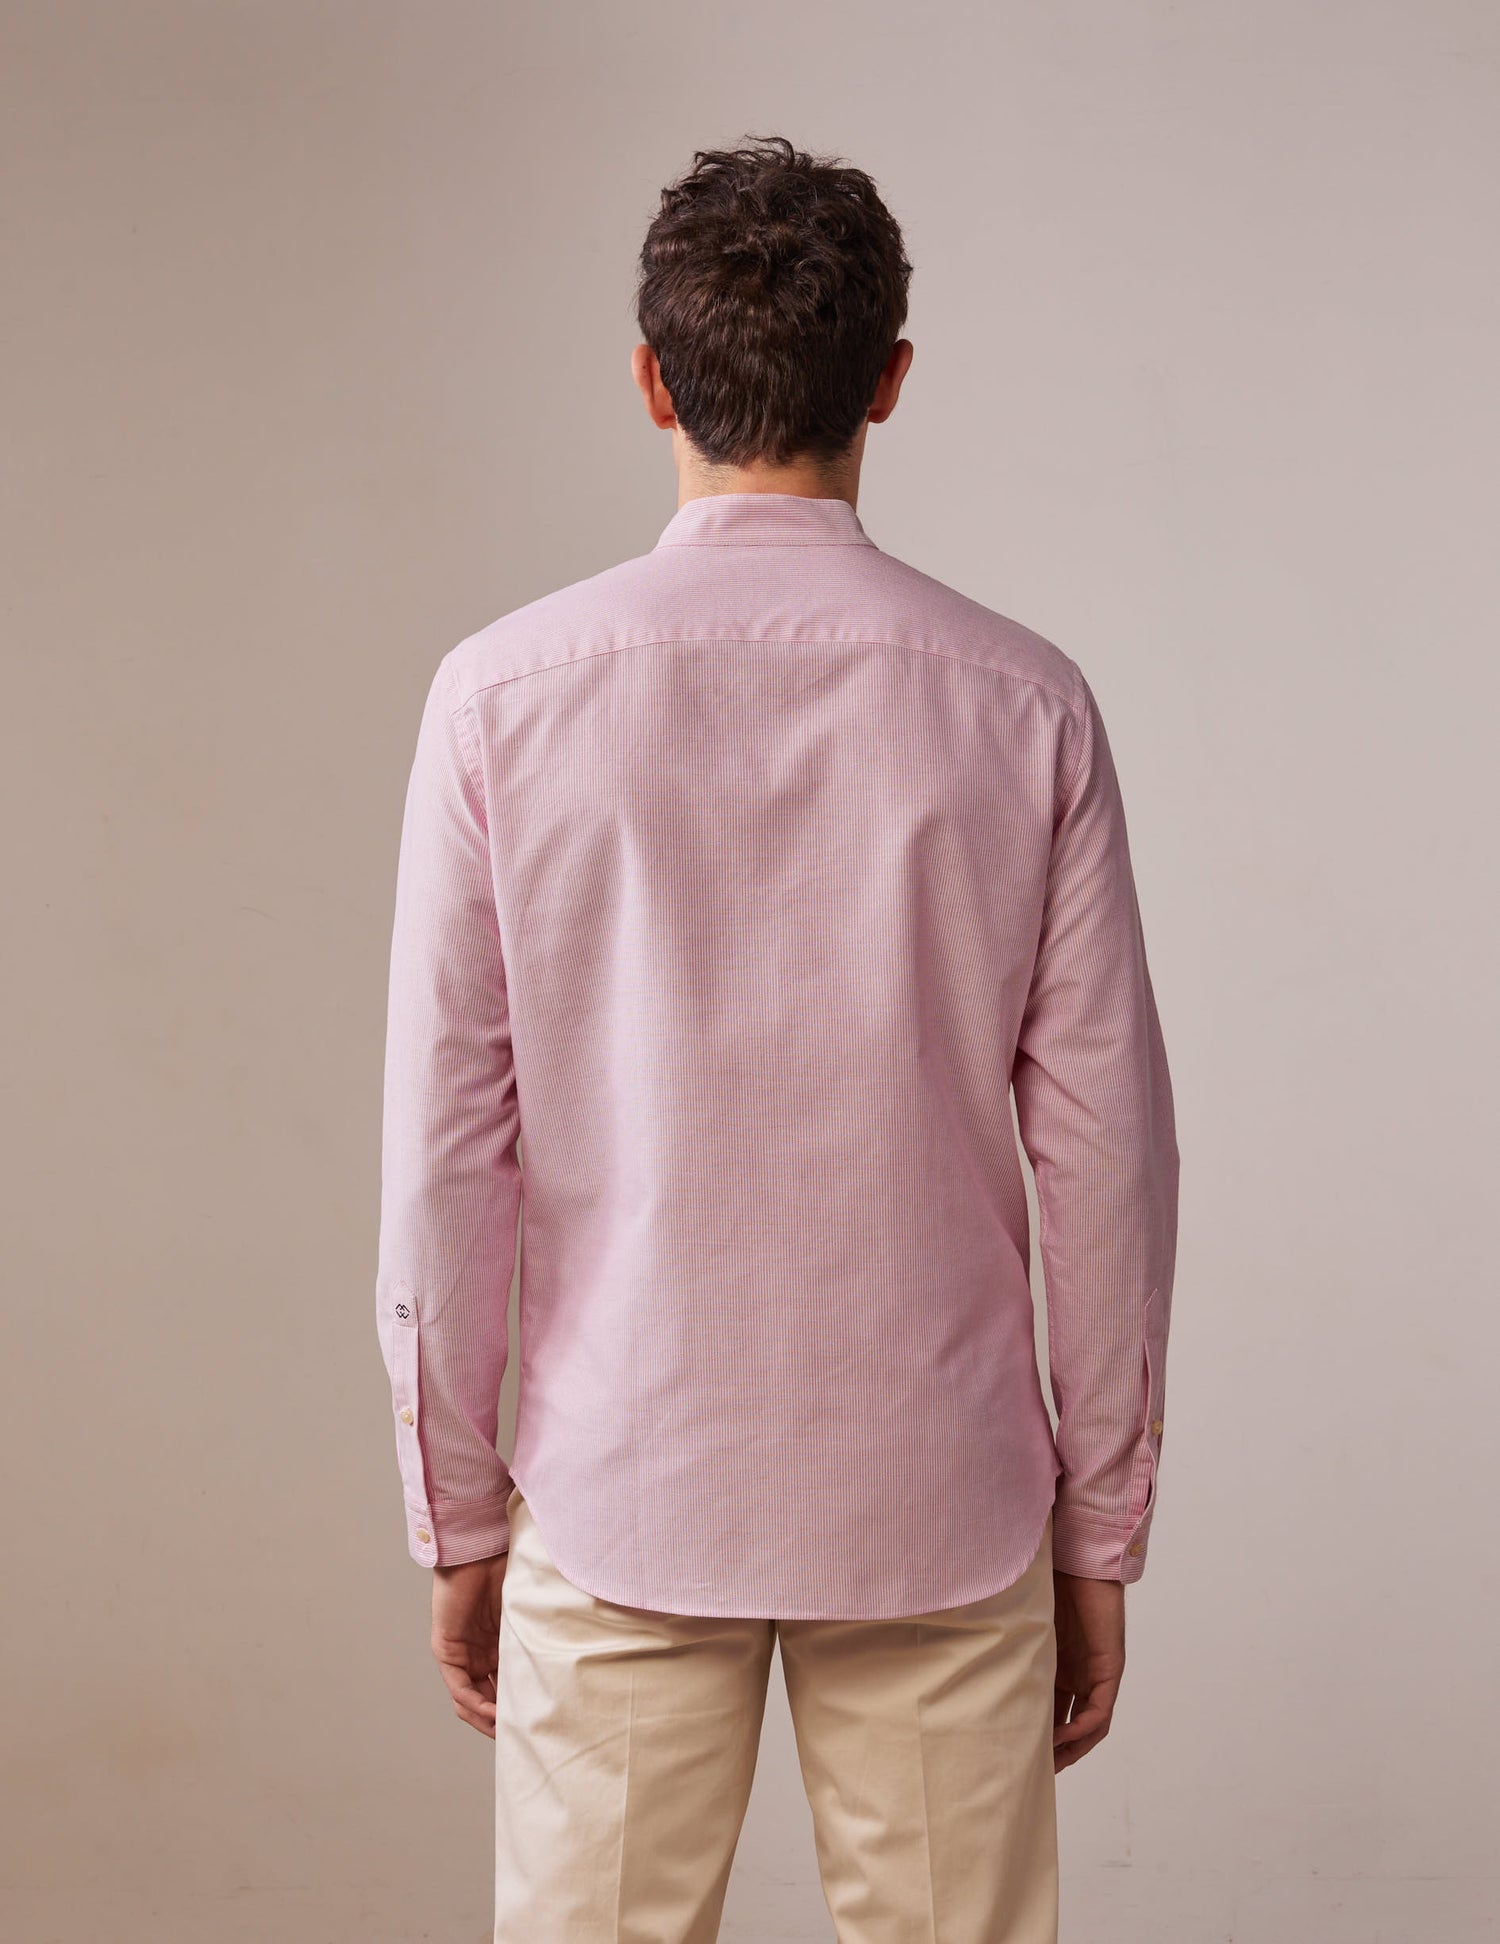 Striped pink Carl shirt - Oxford - Open straight Collar#2